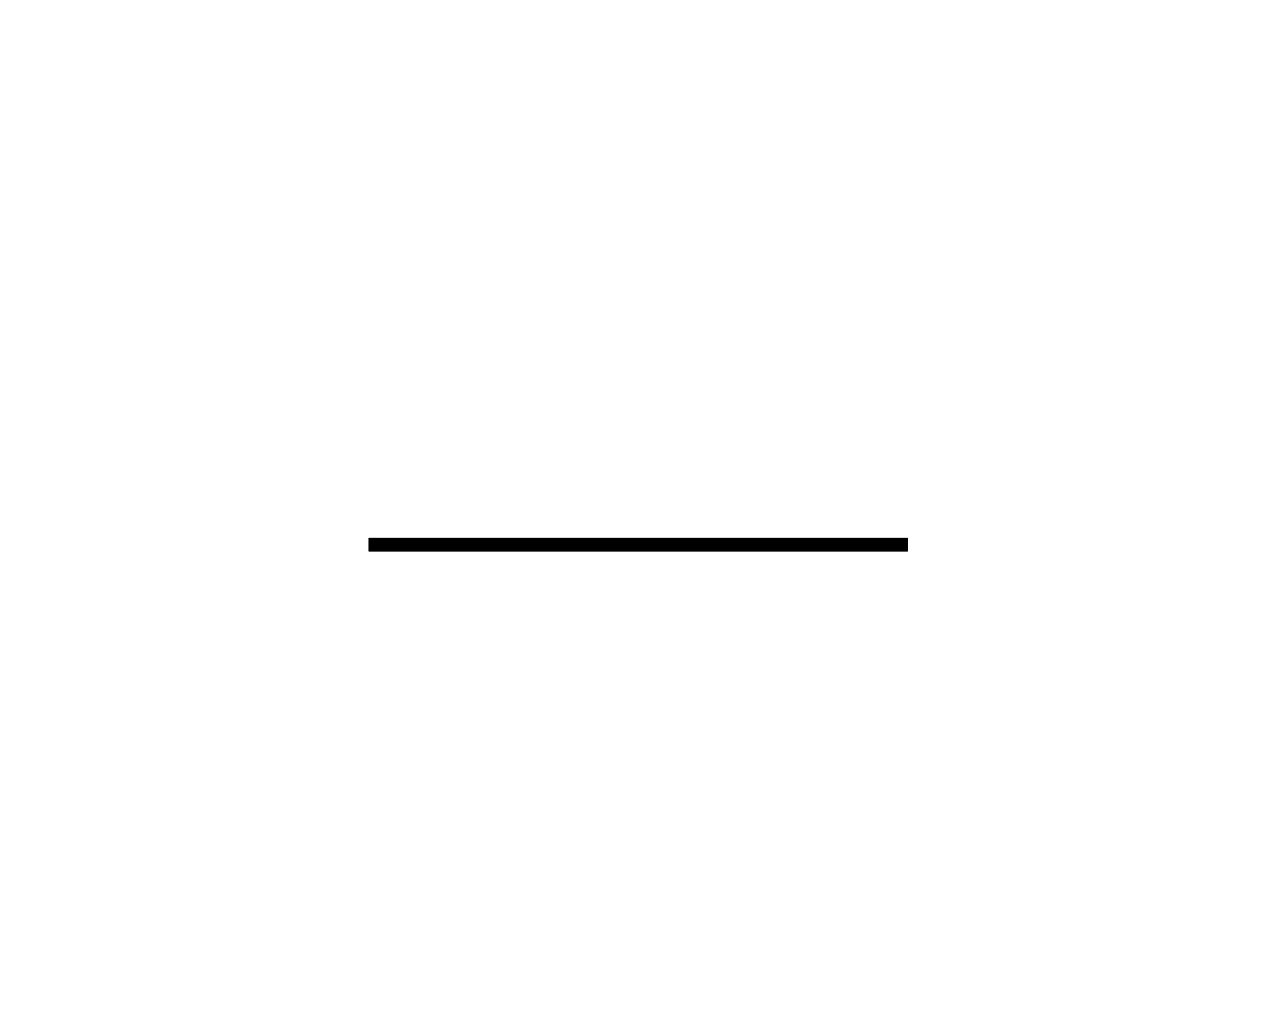 DSD Cocktail Ingredients's web page